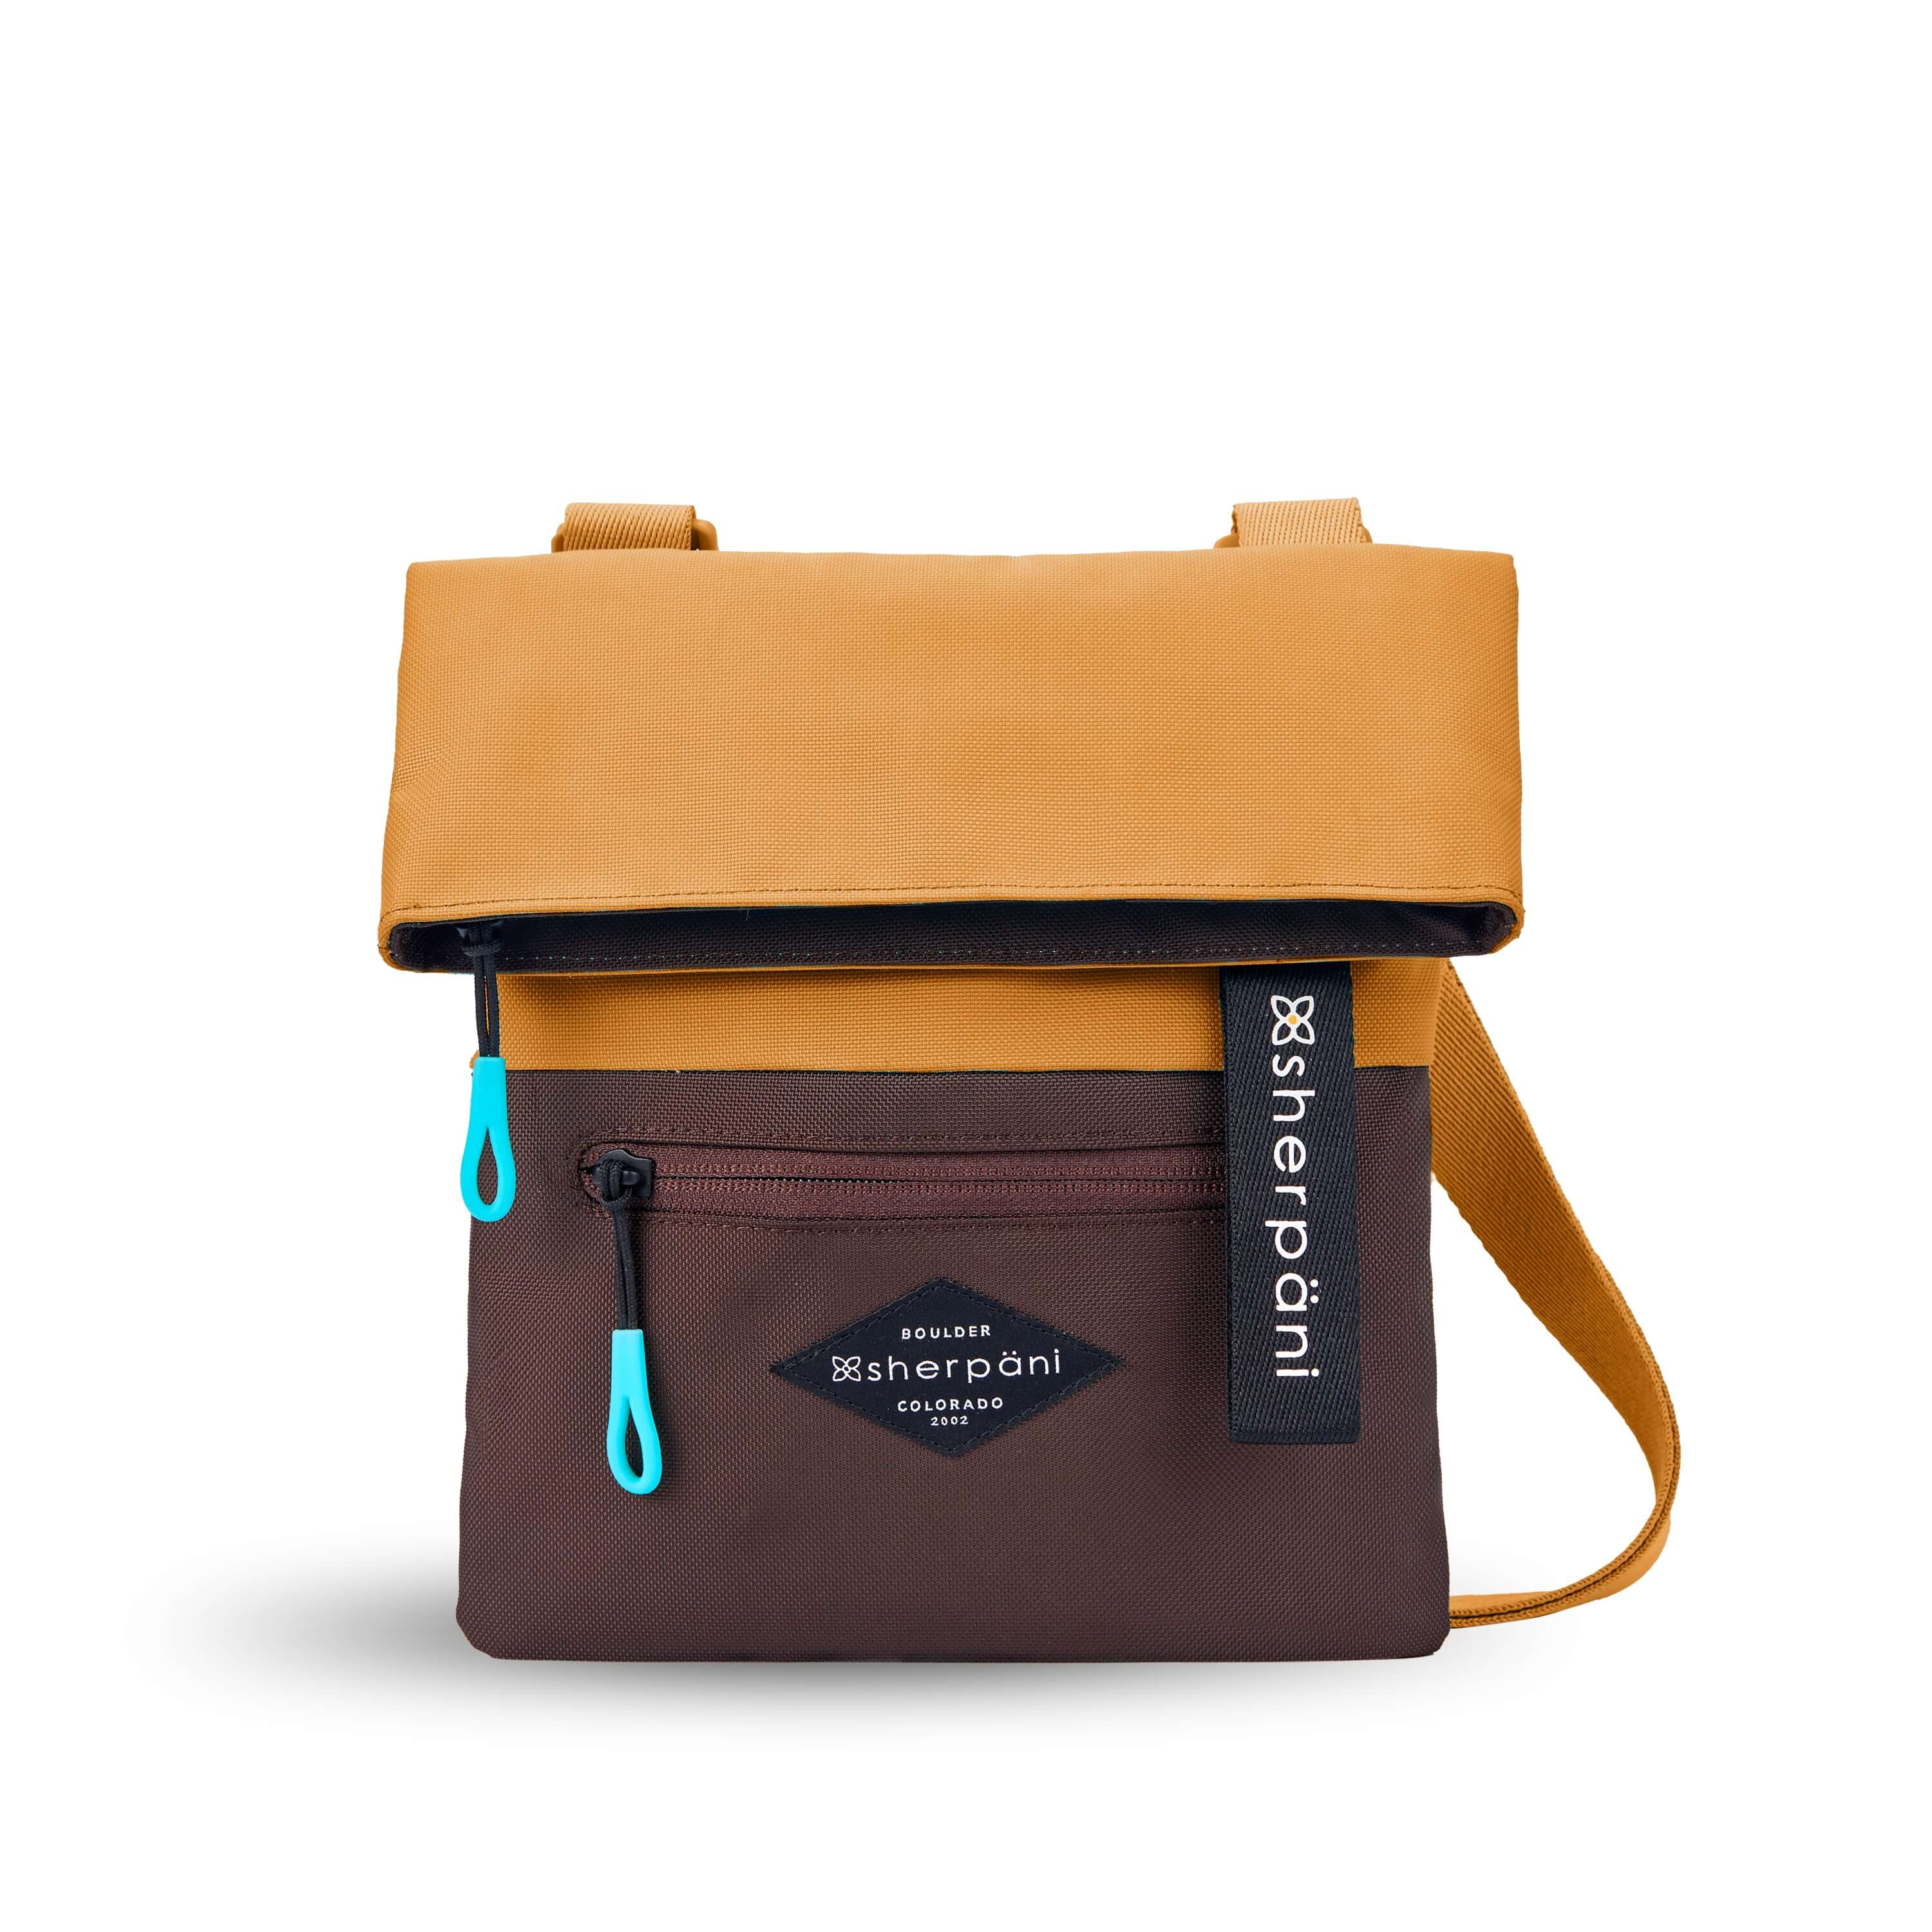 Flat front view of Sherpani crossbody, the Pica in Sundial. The bag is two toned: the top half is burnt yellow and the bottom half is brown. There is an external zipper pocket on the front panel. Easy pull zippers are accented in aqua. The top of the bag folds over creating a signature look. A branded Sherpani keychain is clipped to the upper right corner. The bag has an adjustable crossbody strap. 